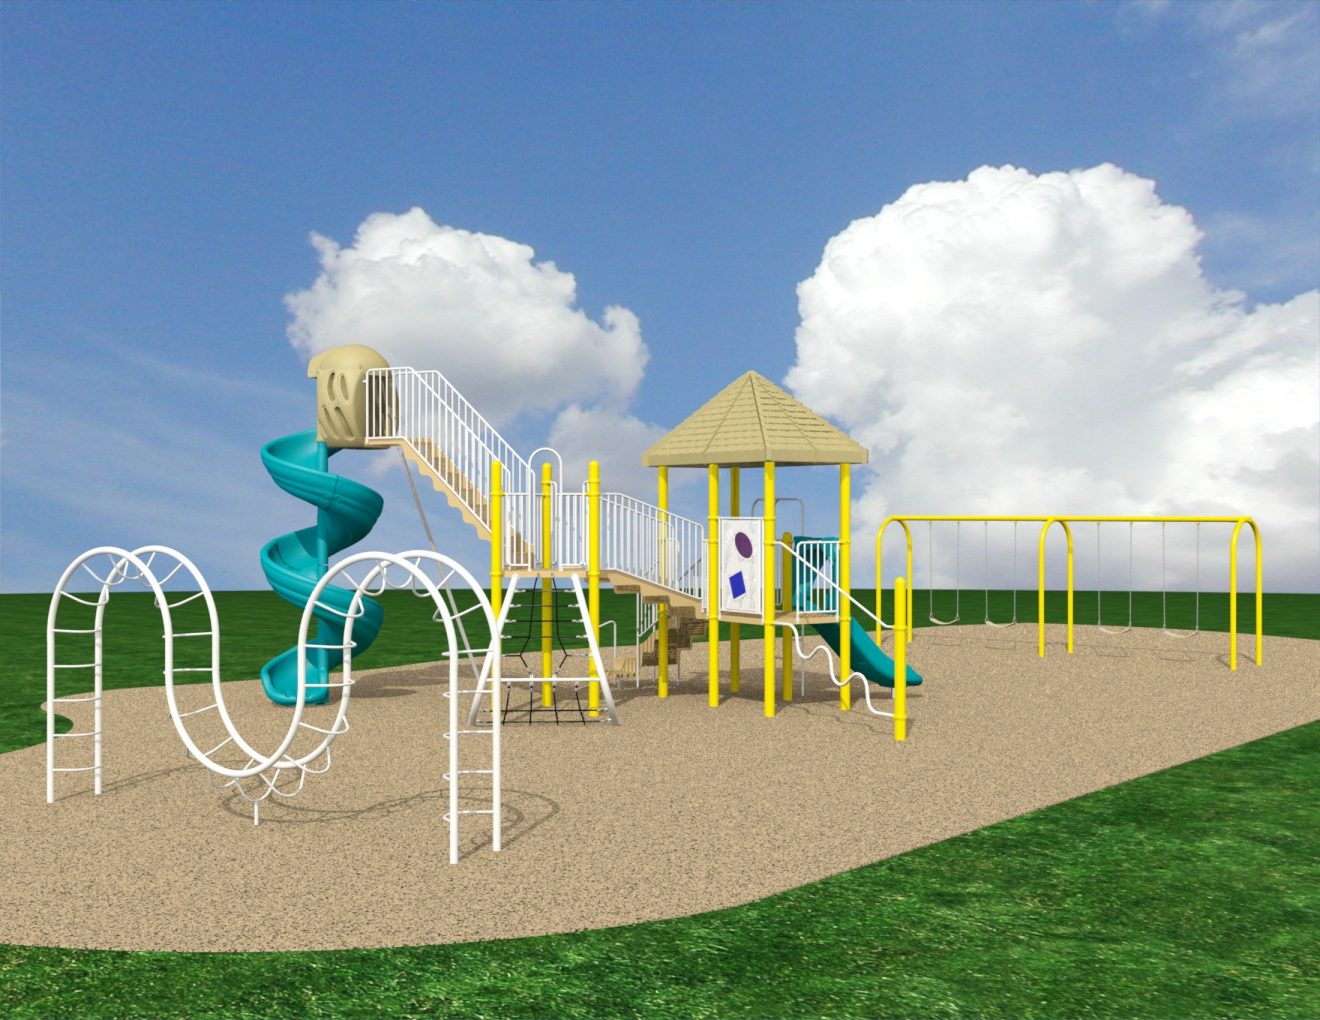 City Council Votes to Authorize Cathedral City’s Century Park Renovation Project